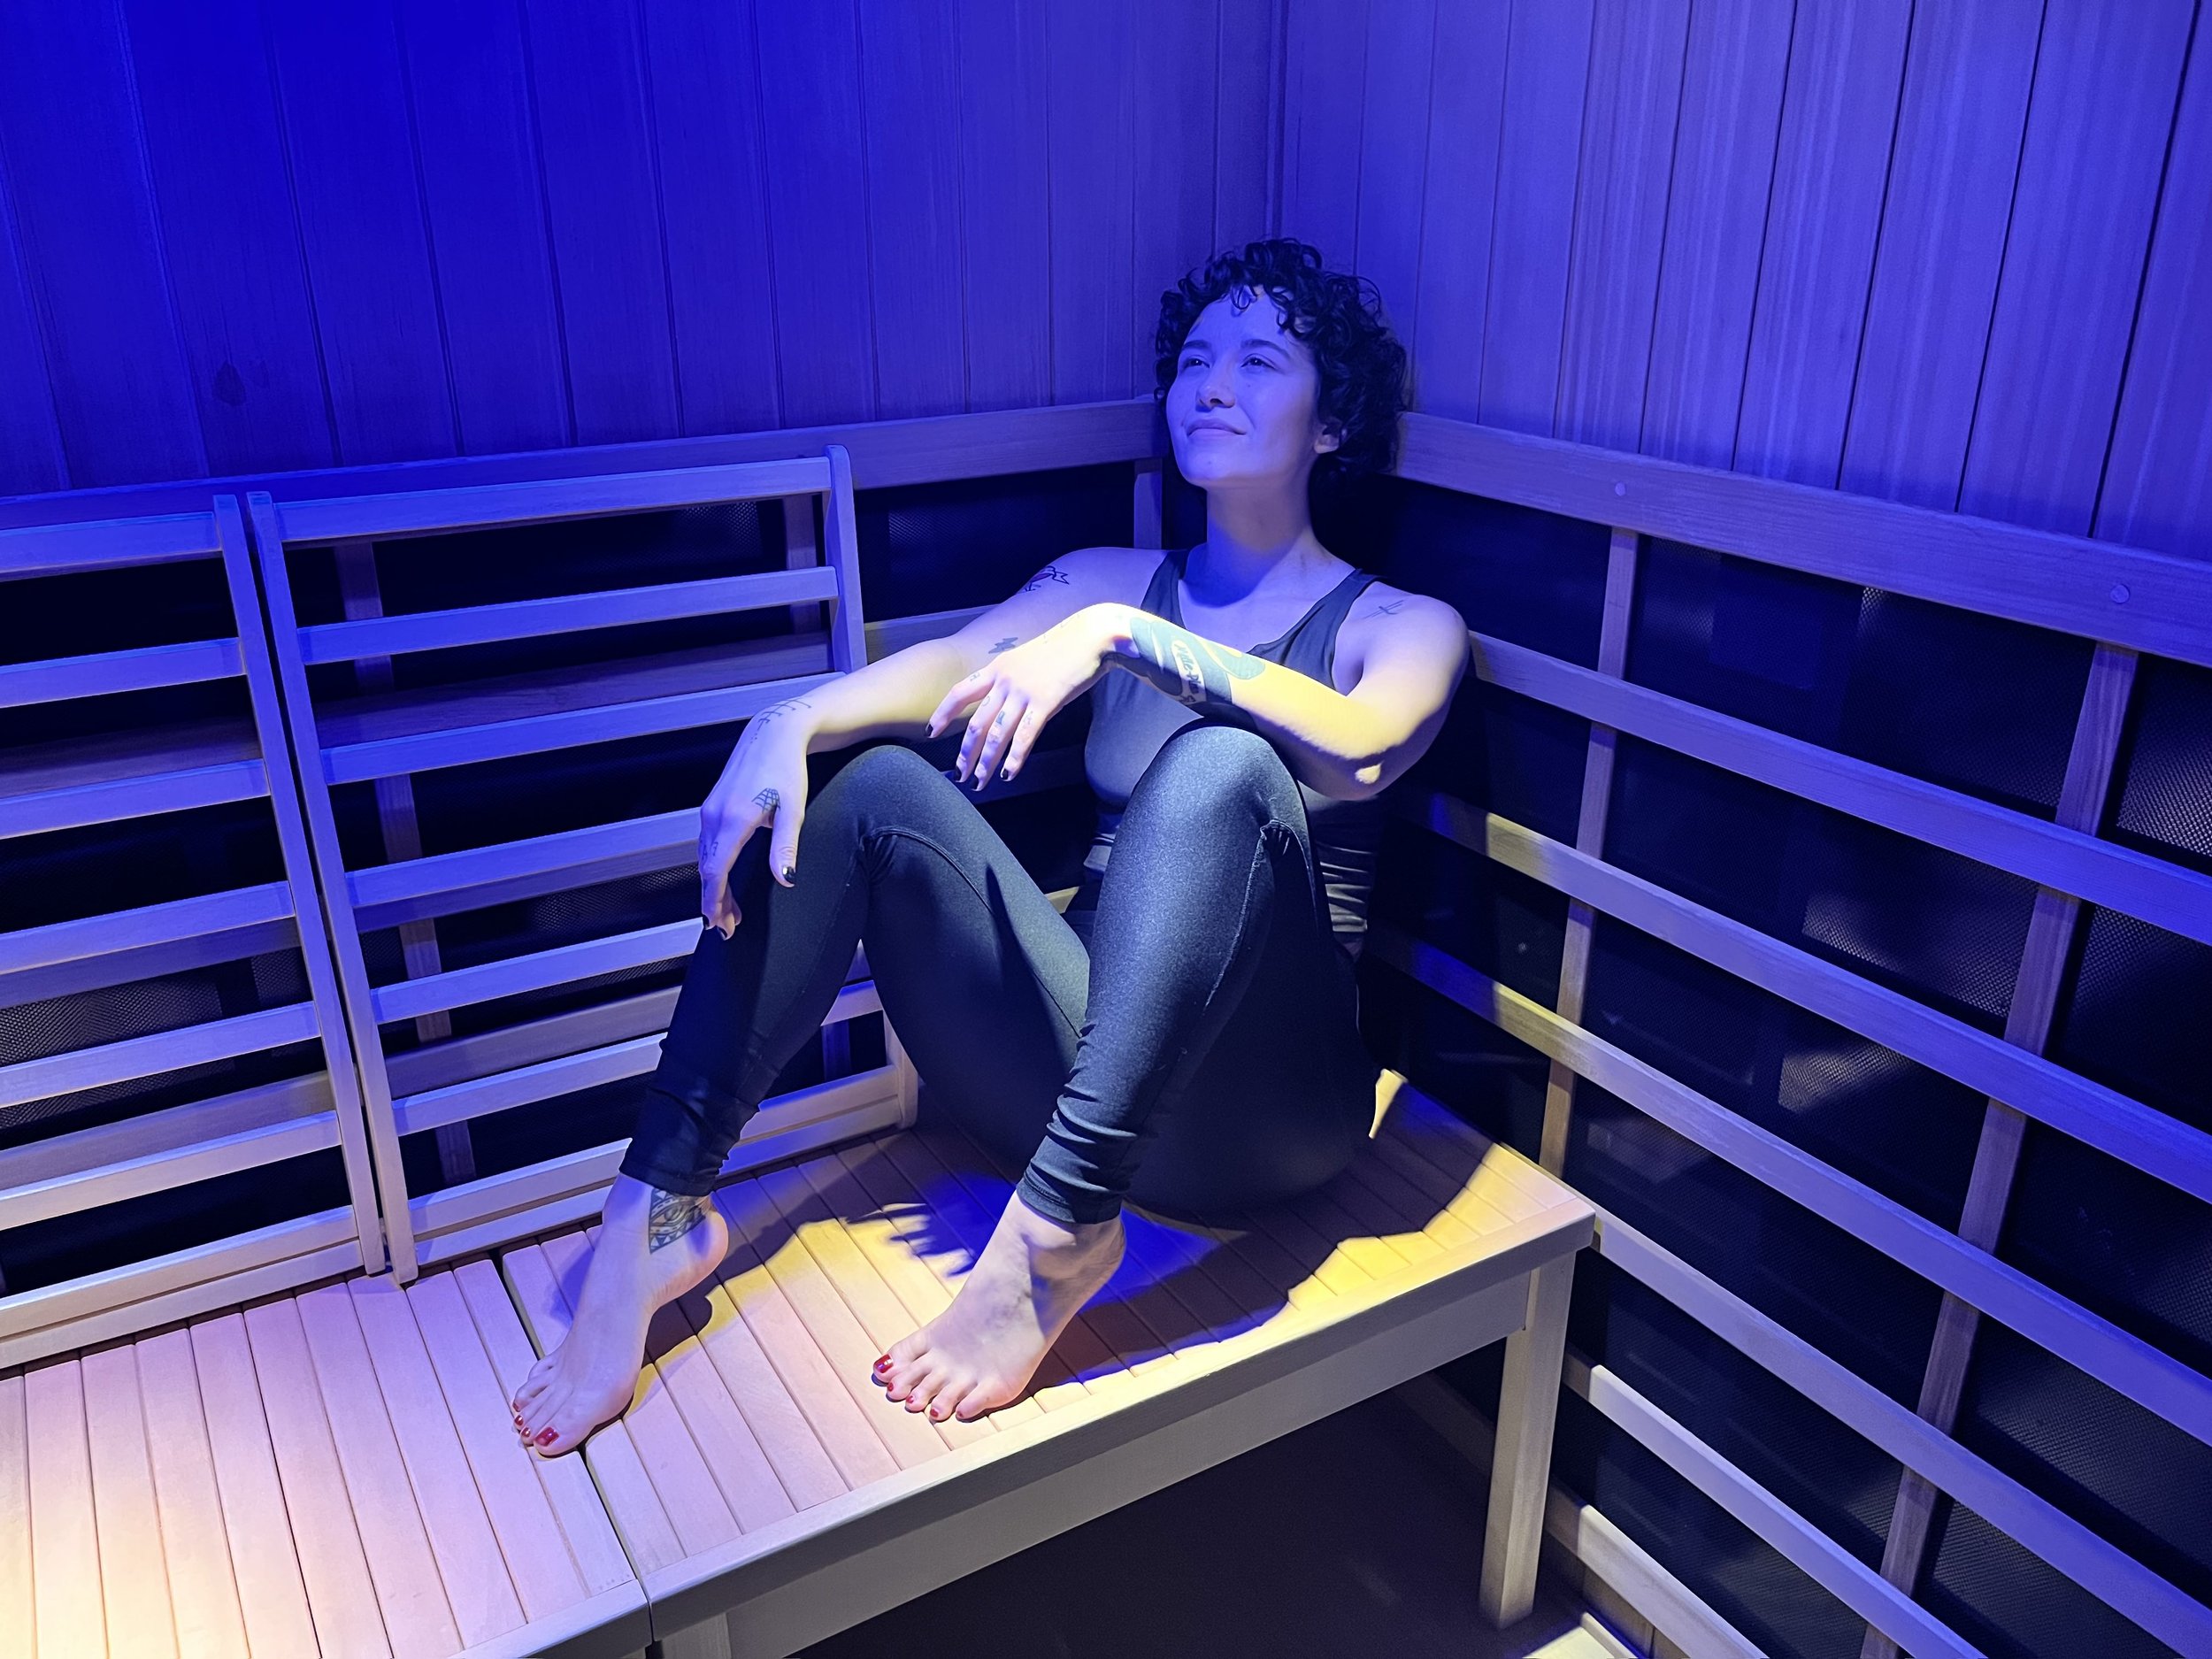 Infrared Vs. Traditional Saunas